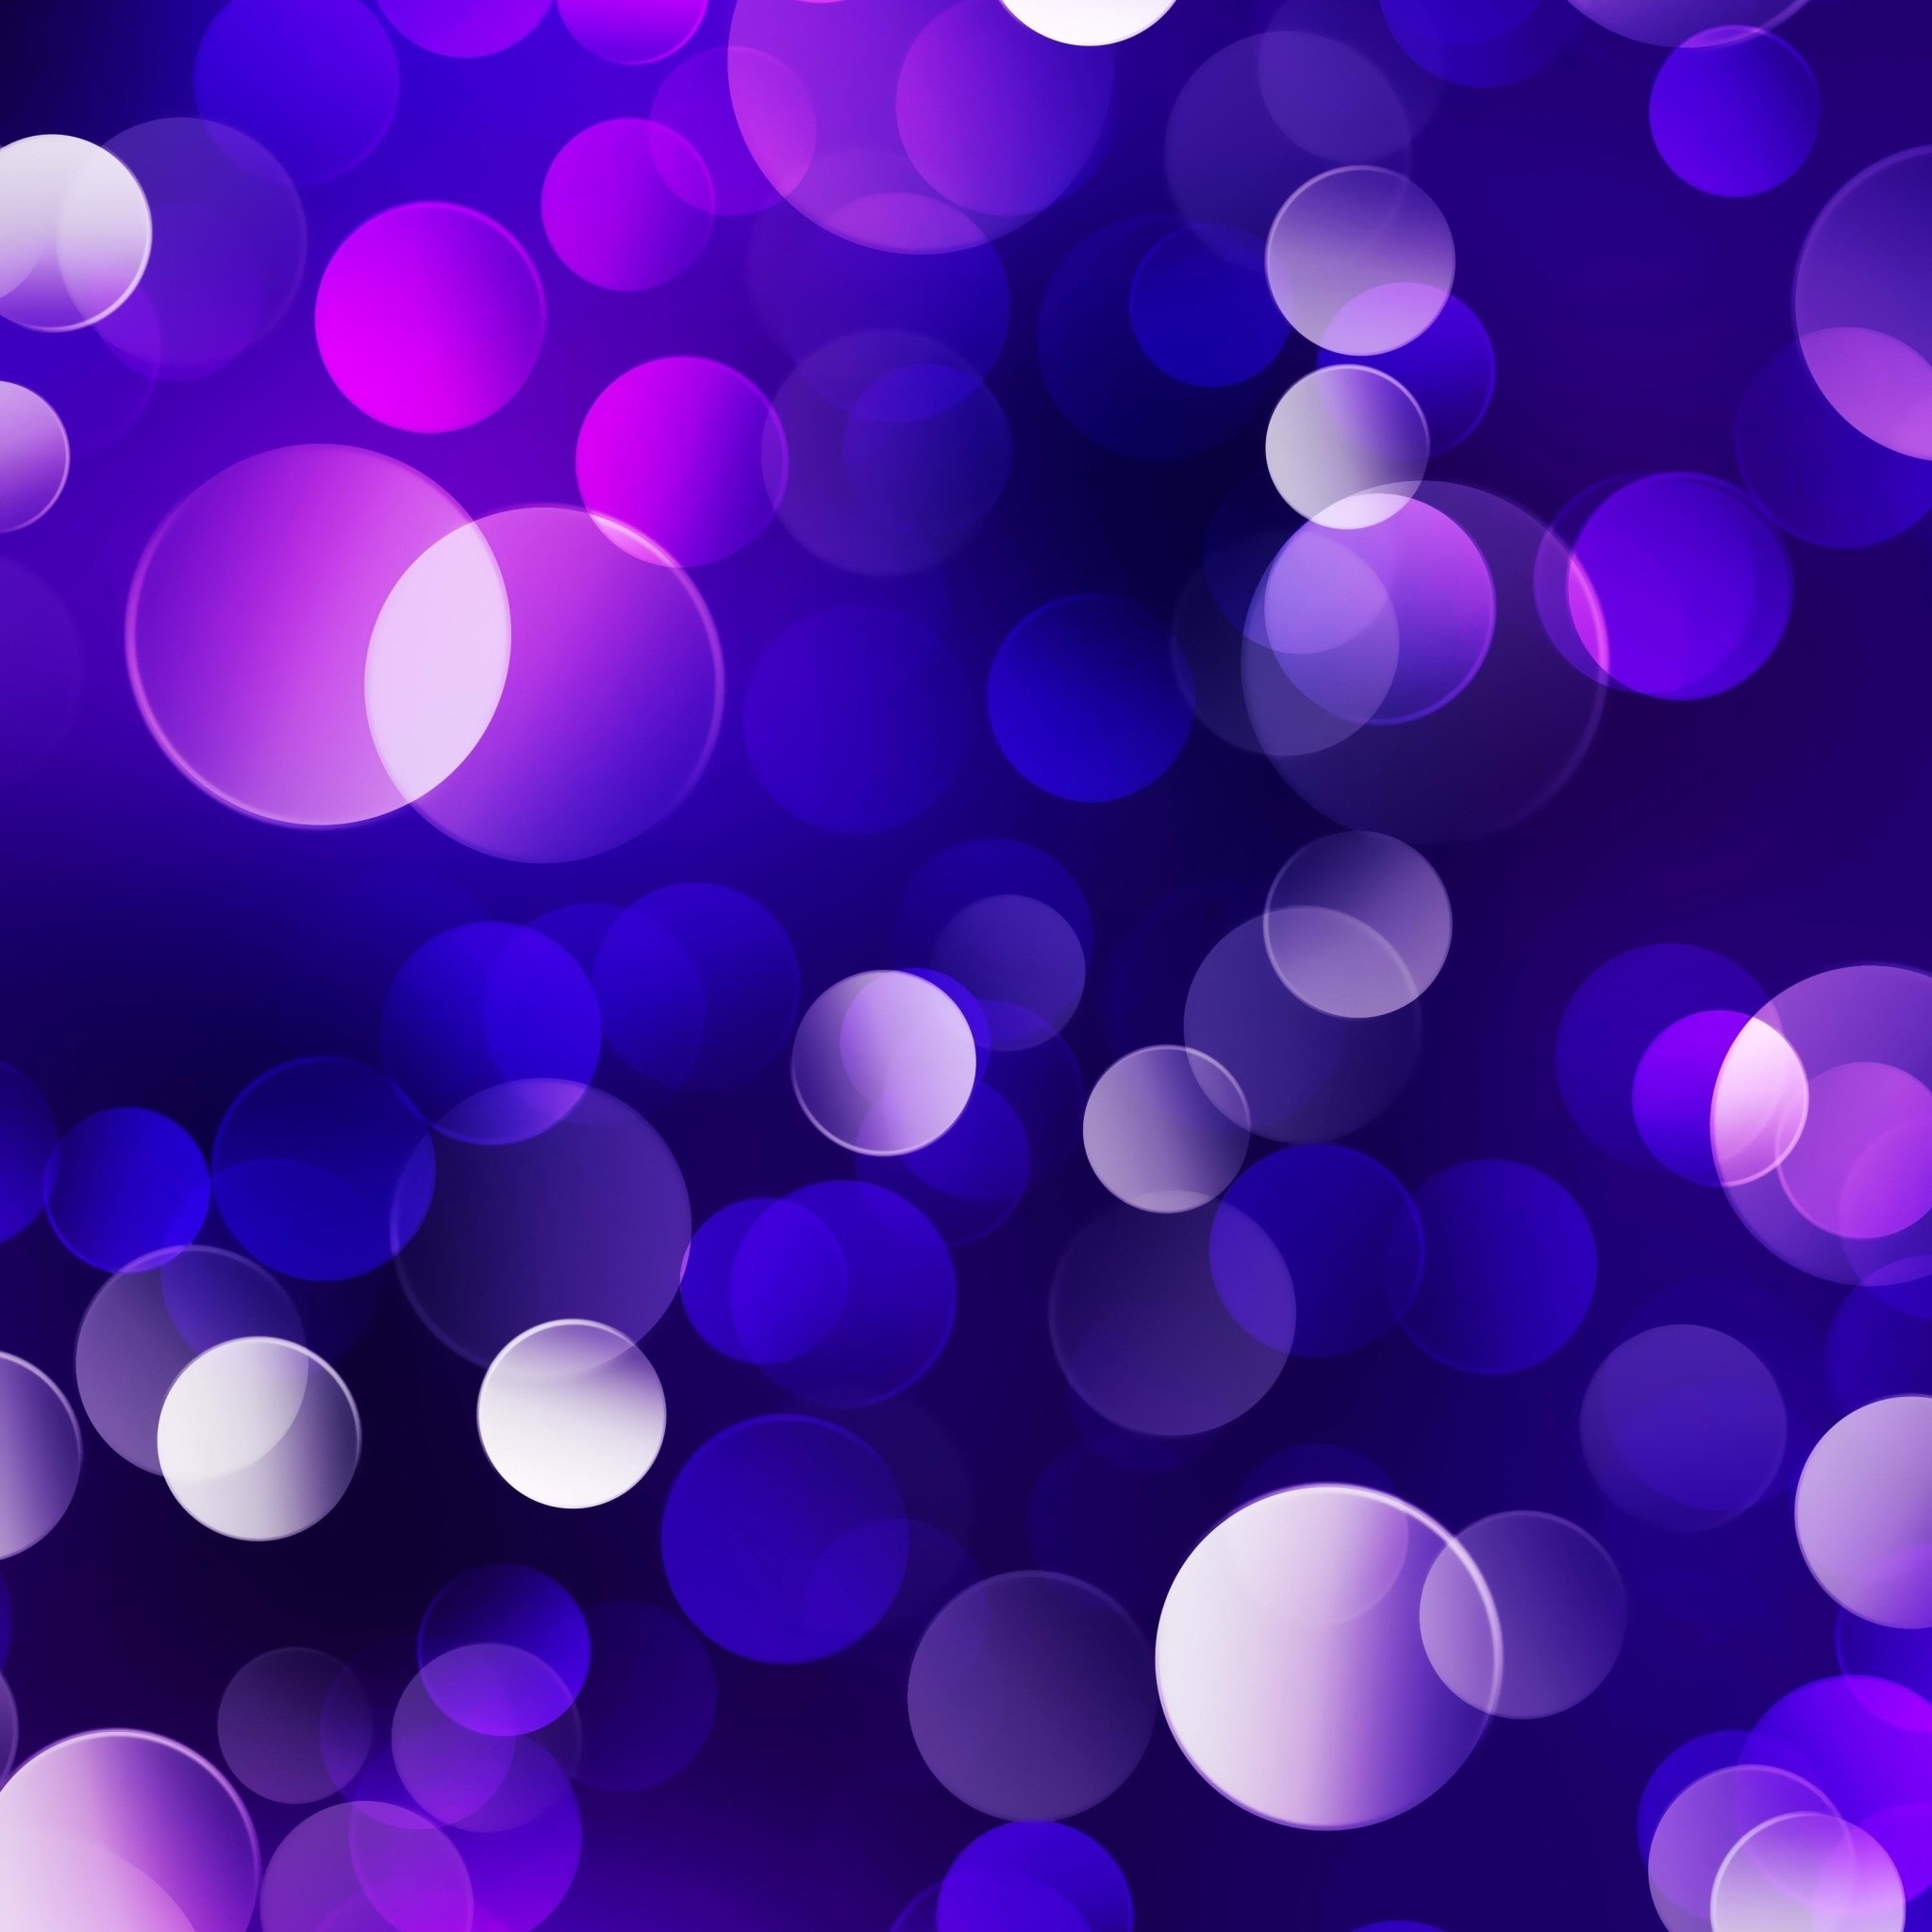 Purple Abstract Background HD wallpaper download in 2048×2048, 1024×1024 resolutions. Find similar and same. Cool WallpaperWallpaper DesktopPhone